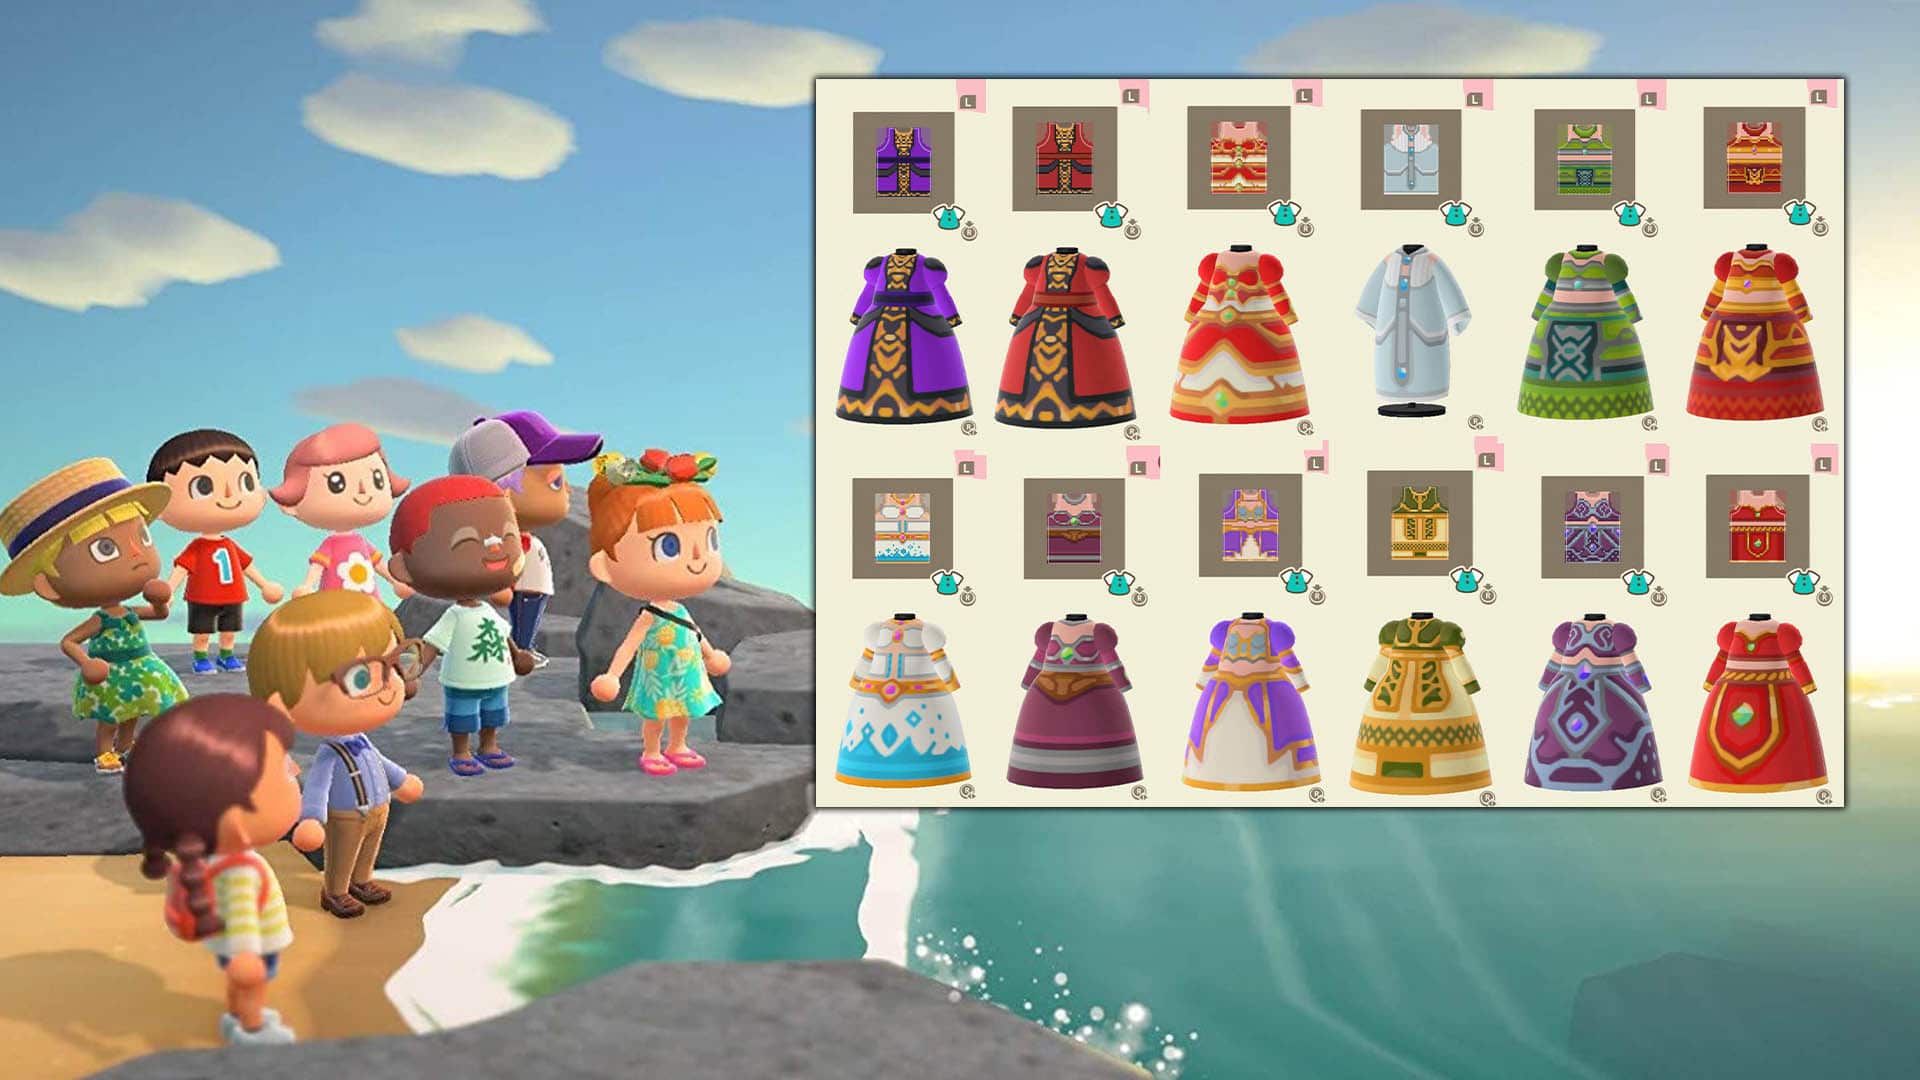 WoW Outfits in Animal Crossing: New Horizons